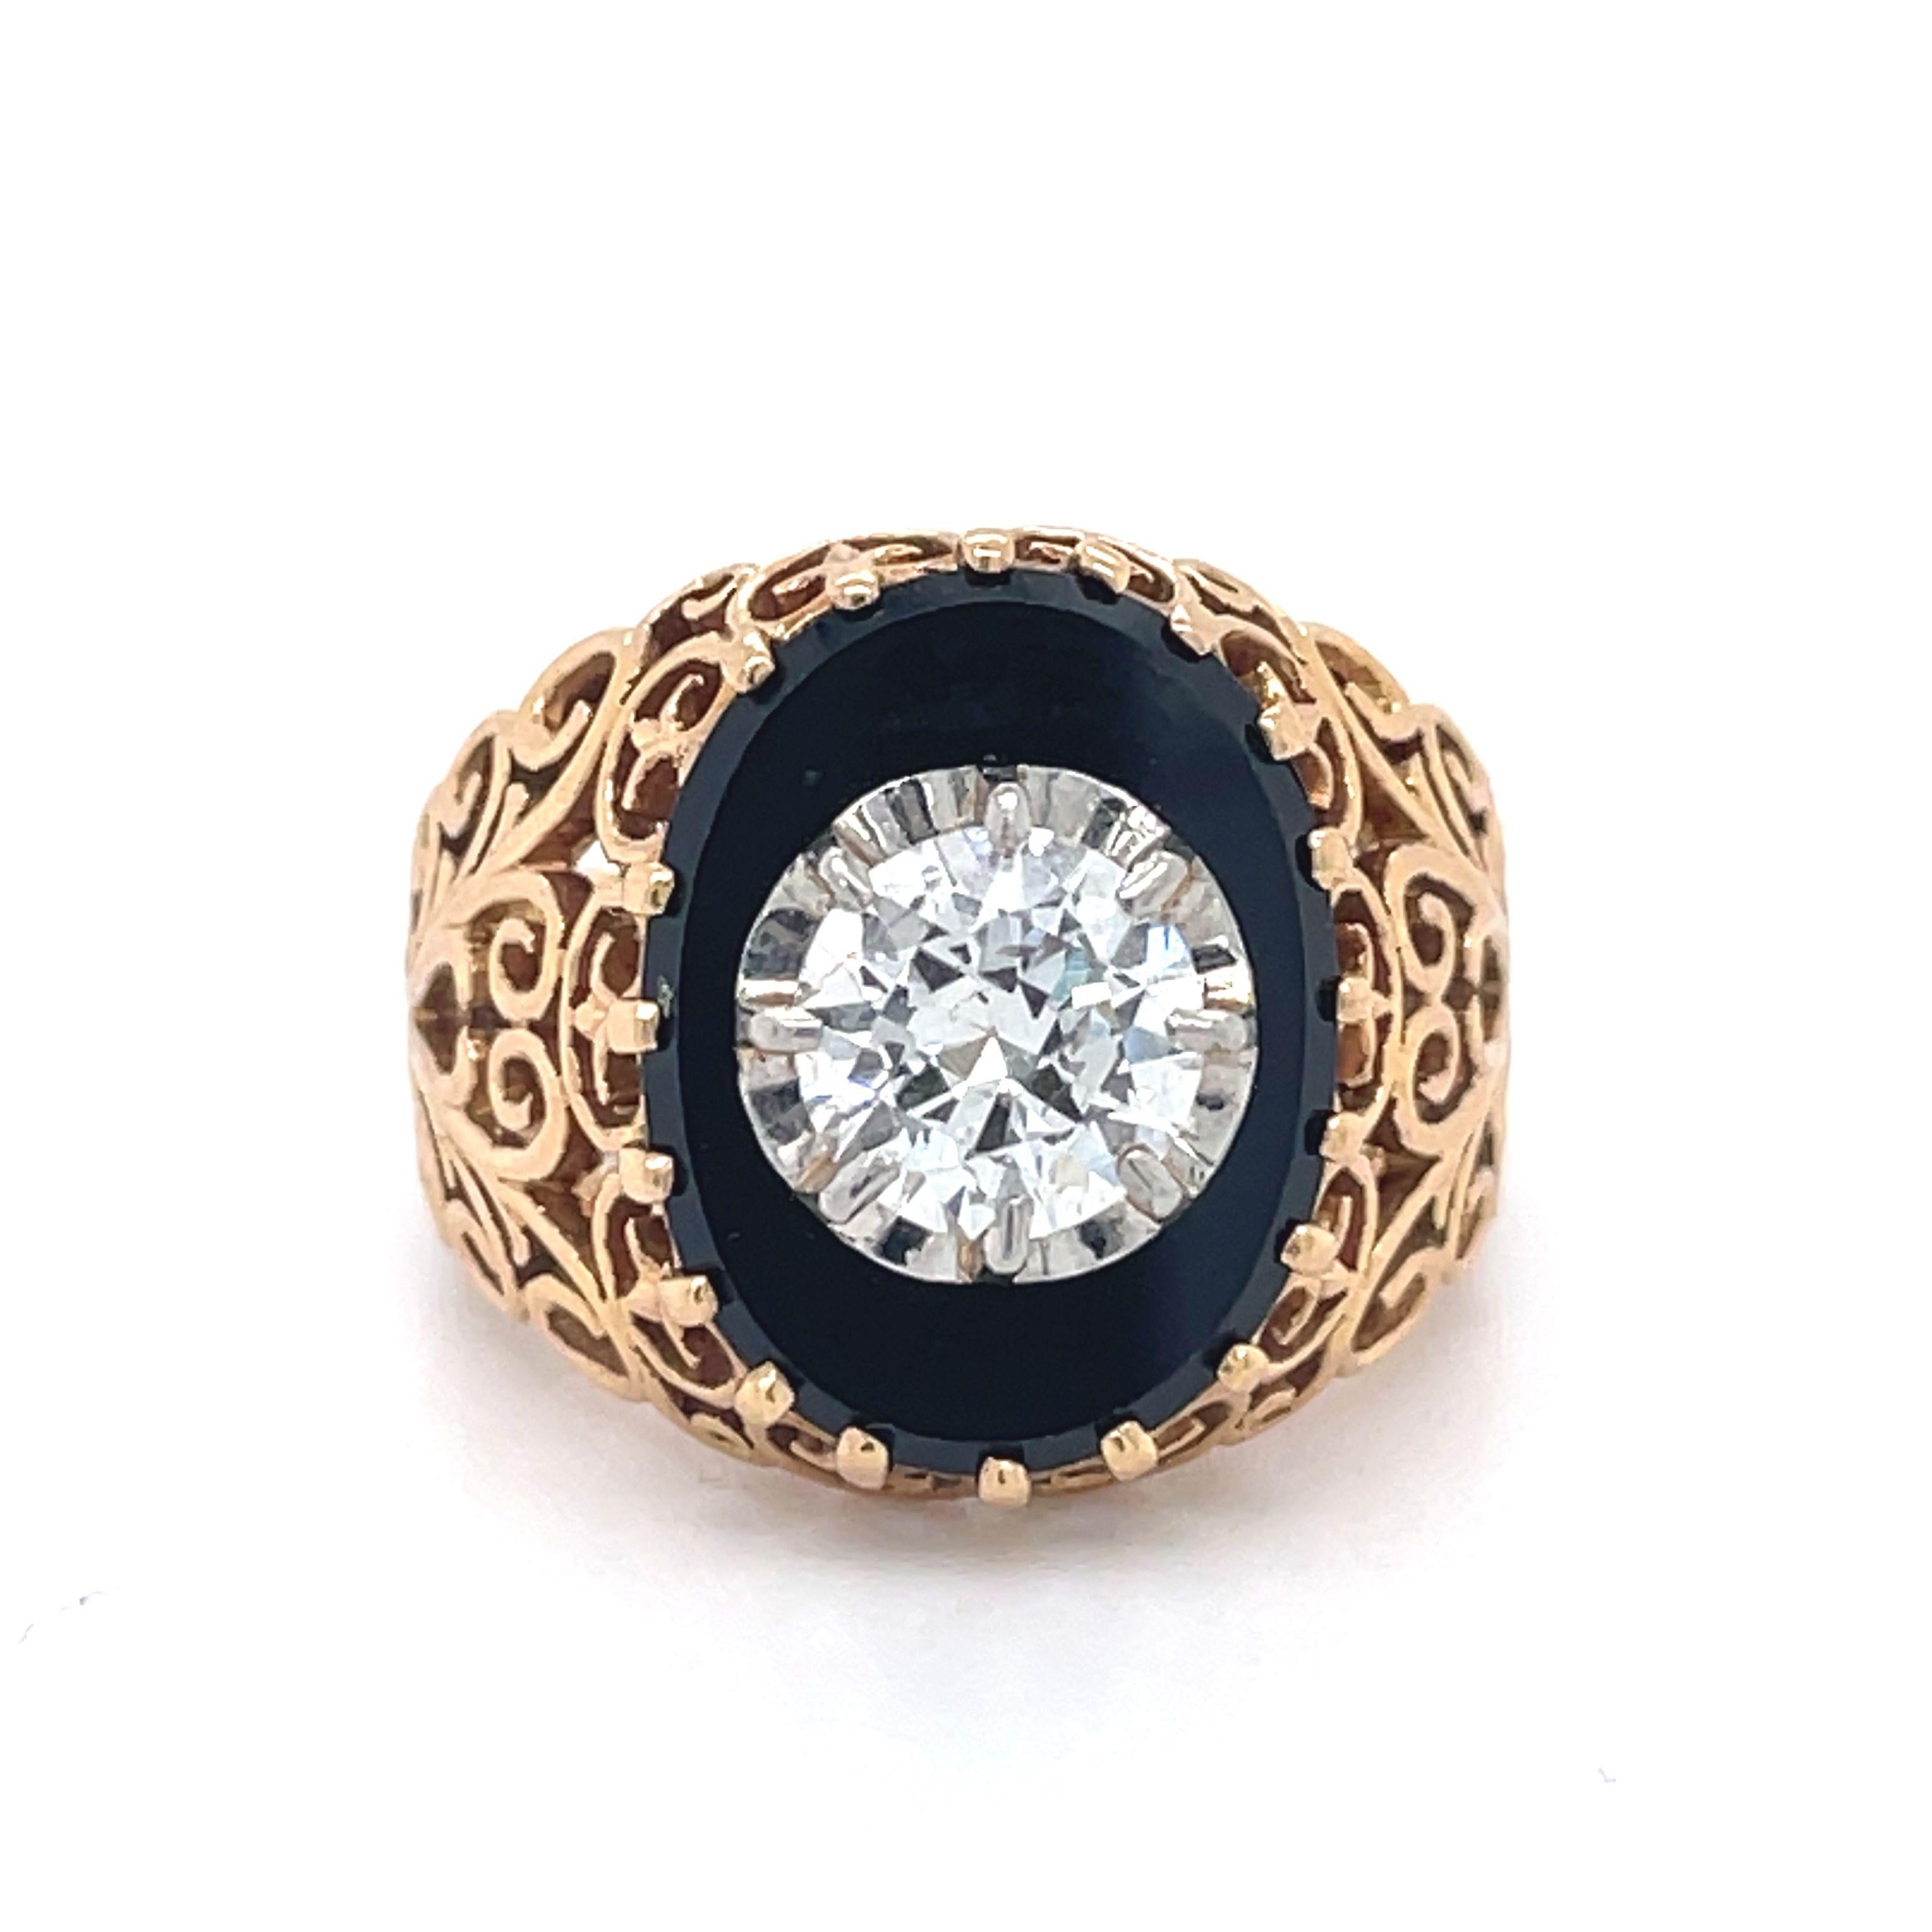 Filigree Ring- Vintage Onyx and Diamond Ring, 1ct Round Diamond, 18k Yellow Gold In Excellent Condition For Sale In Ramat Gan, IL